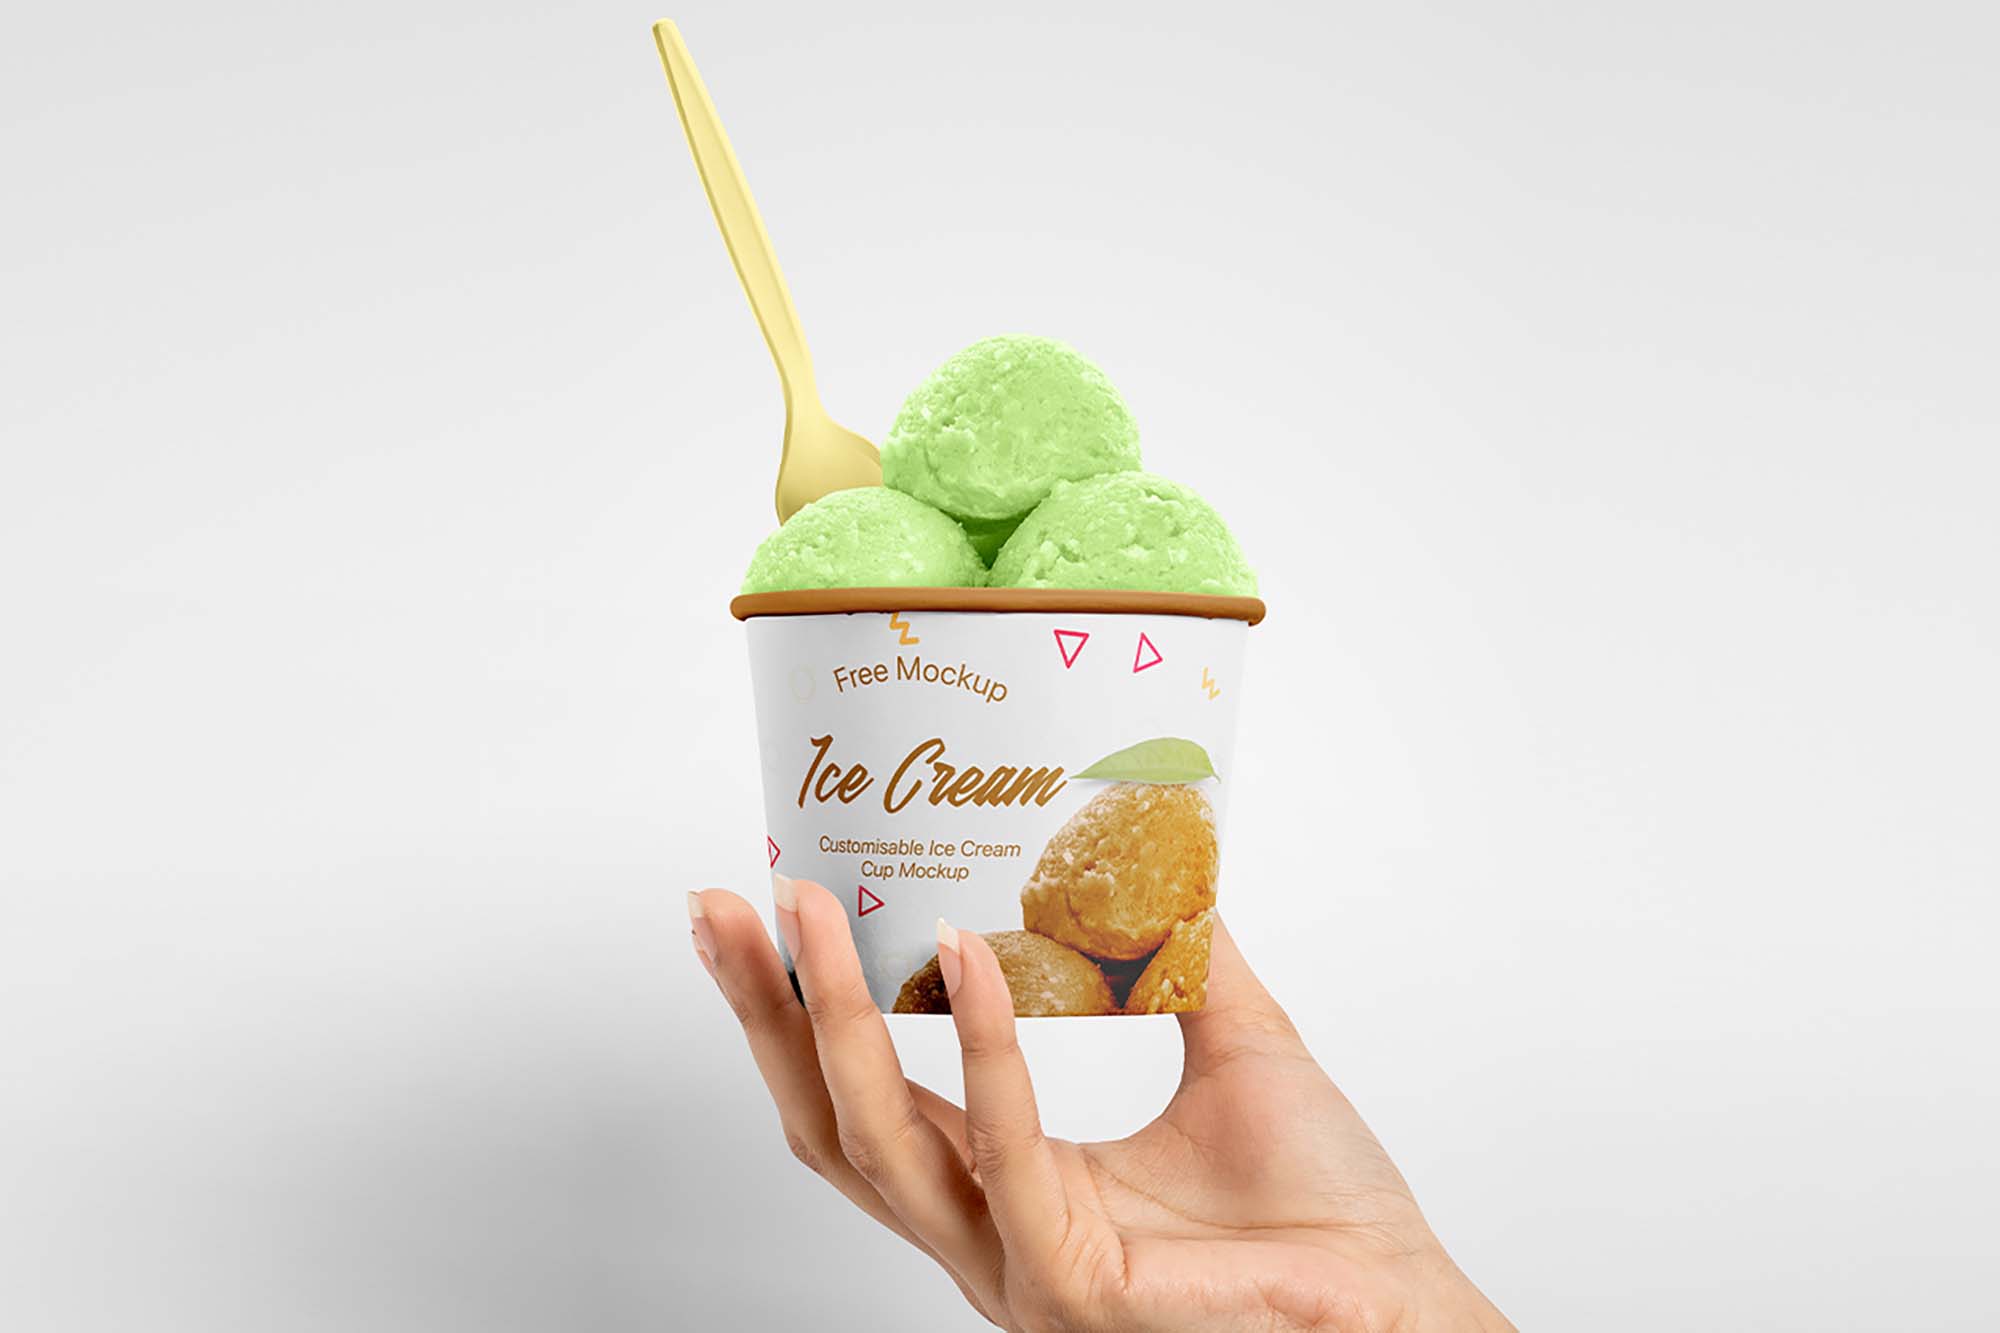 Download Ice Cream Cup in Hand Mockup (Free) by Pixpine